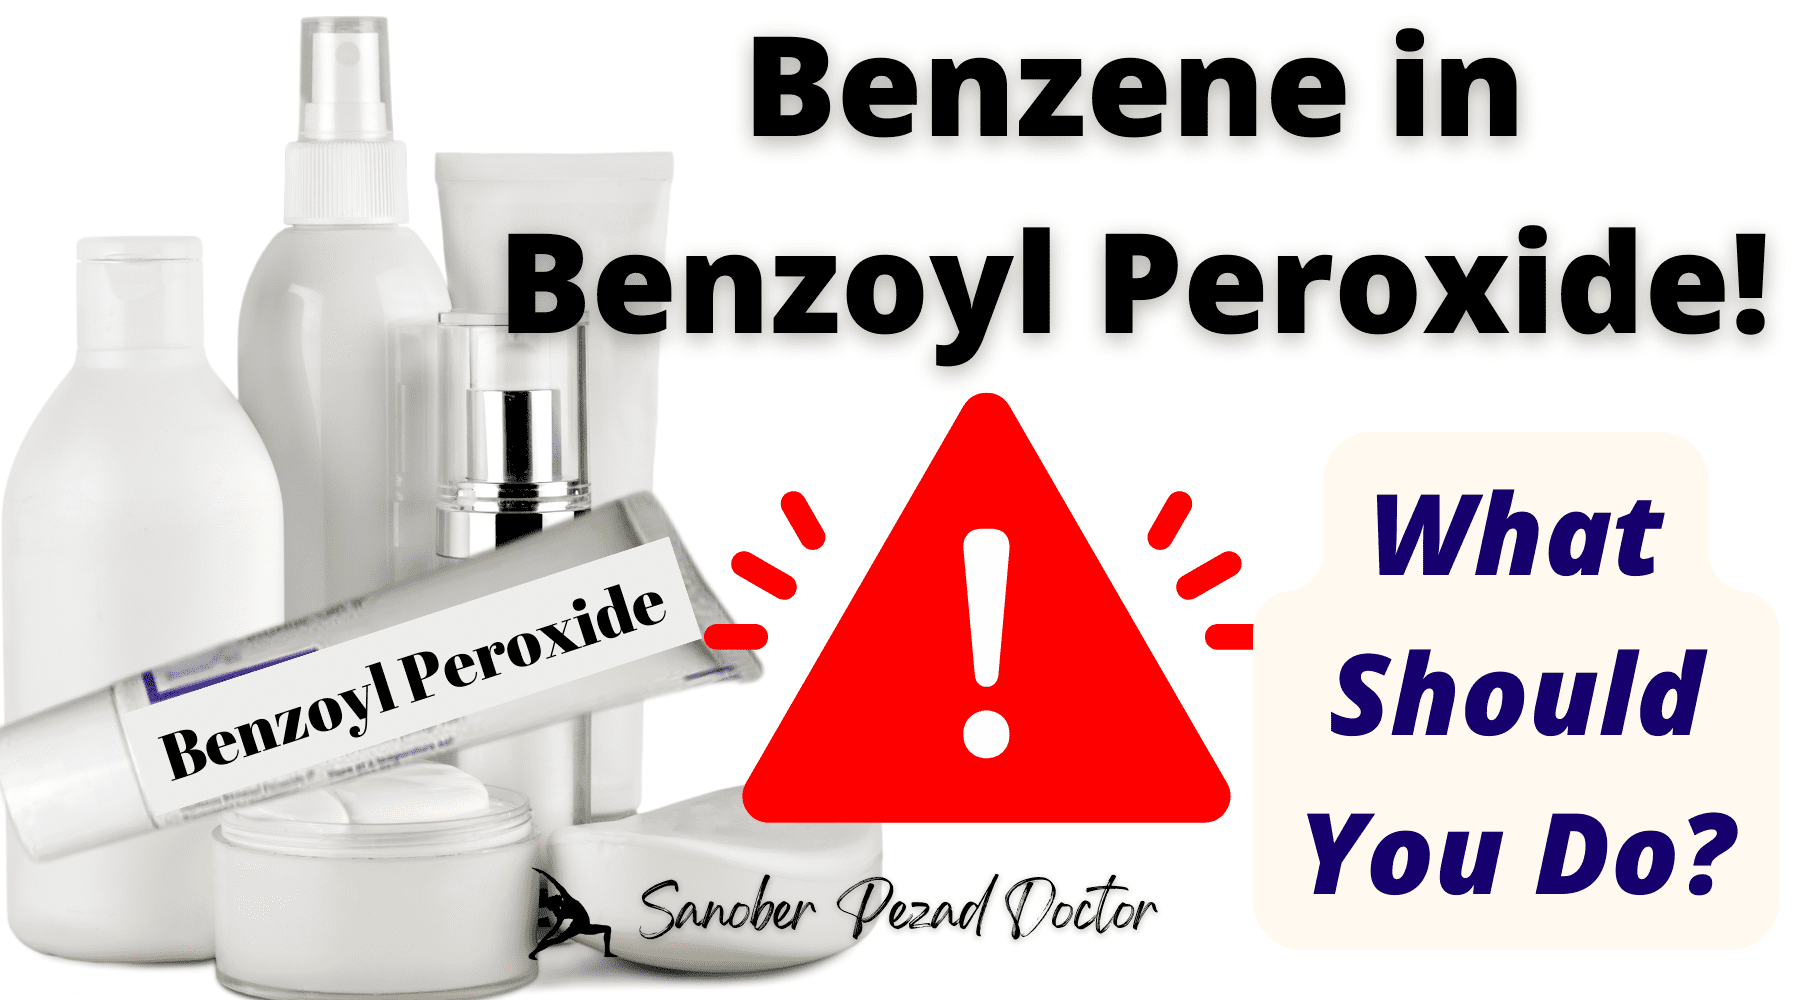 Debunking Benzene in Benzoyl Peroxide- Do You Need to STOP Using Benzoyl Peroxide? I Dr. Sanober Pezad Doctor